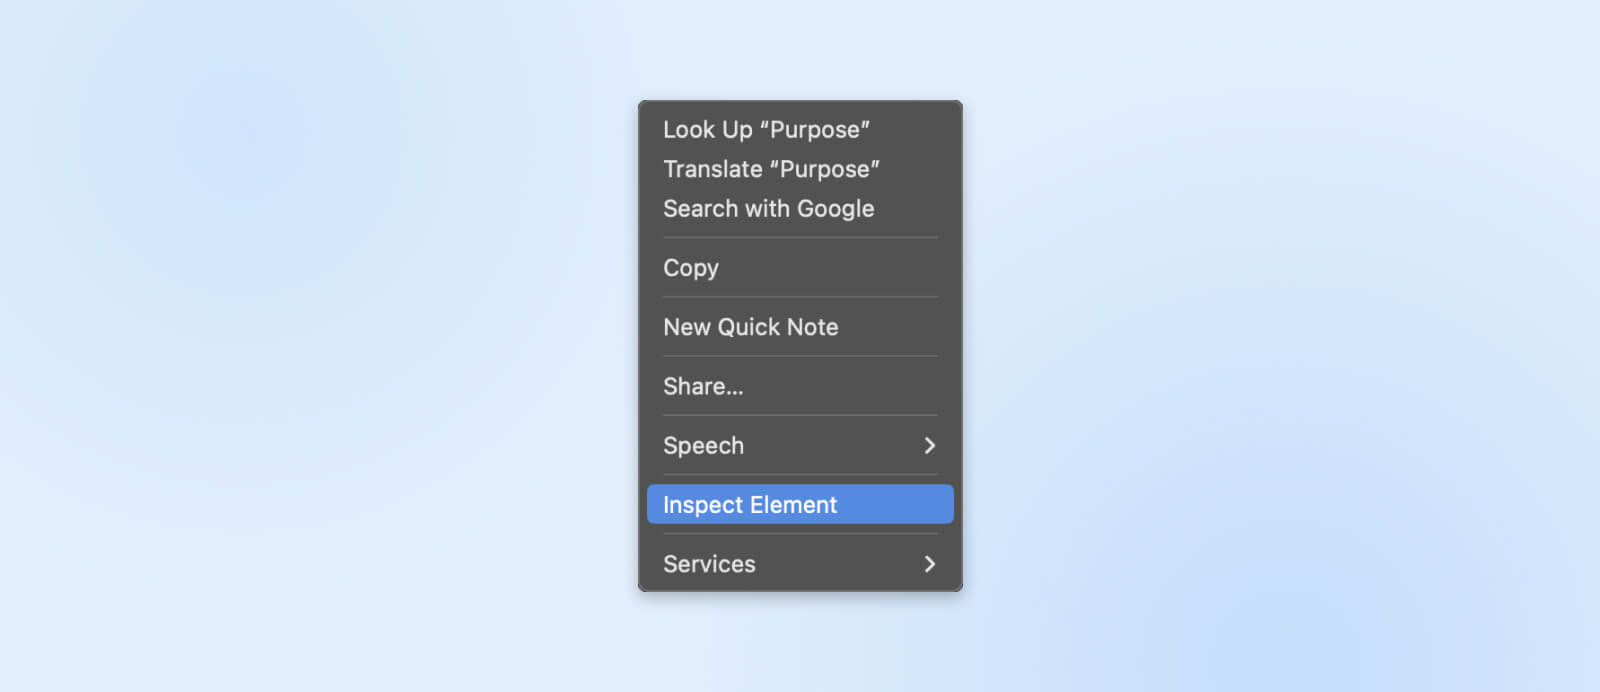 right-click menu showing the "Inspect Element" option